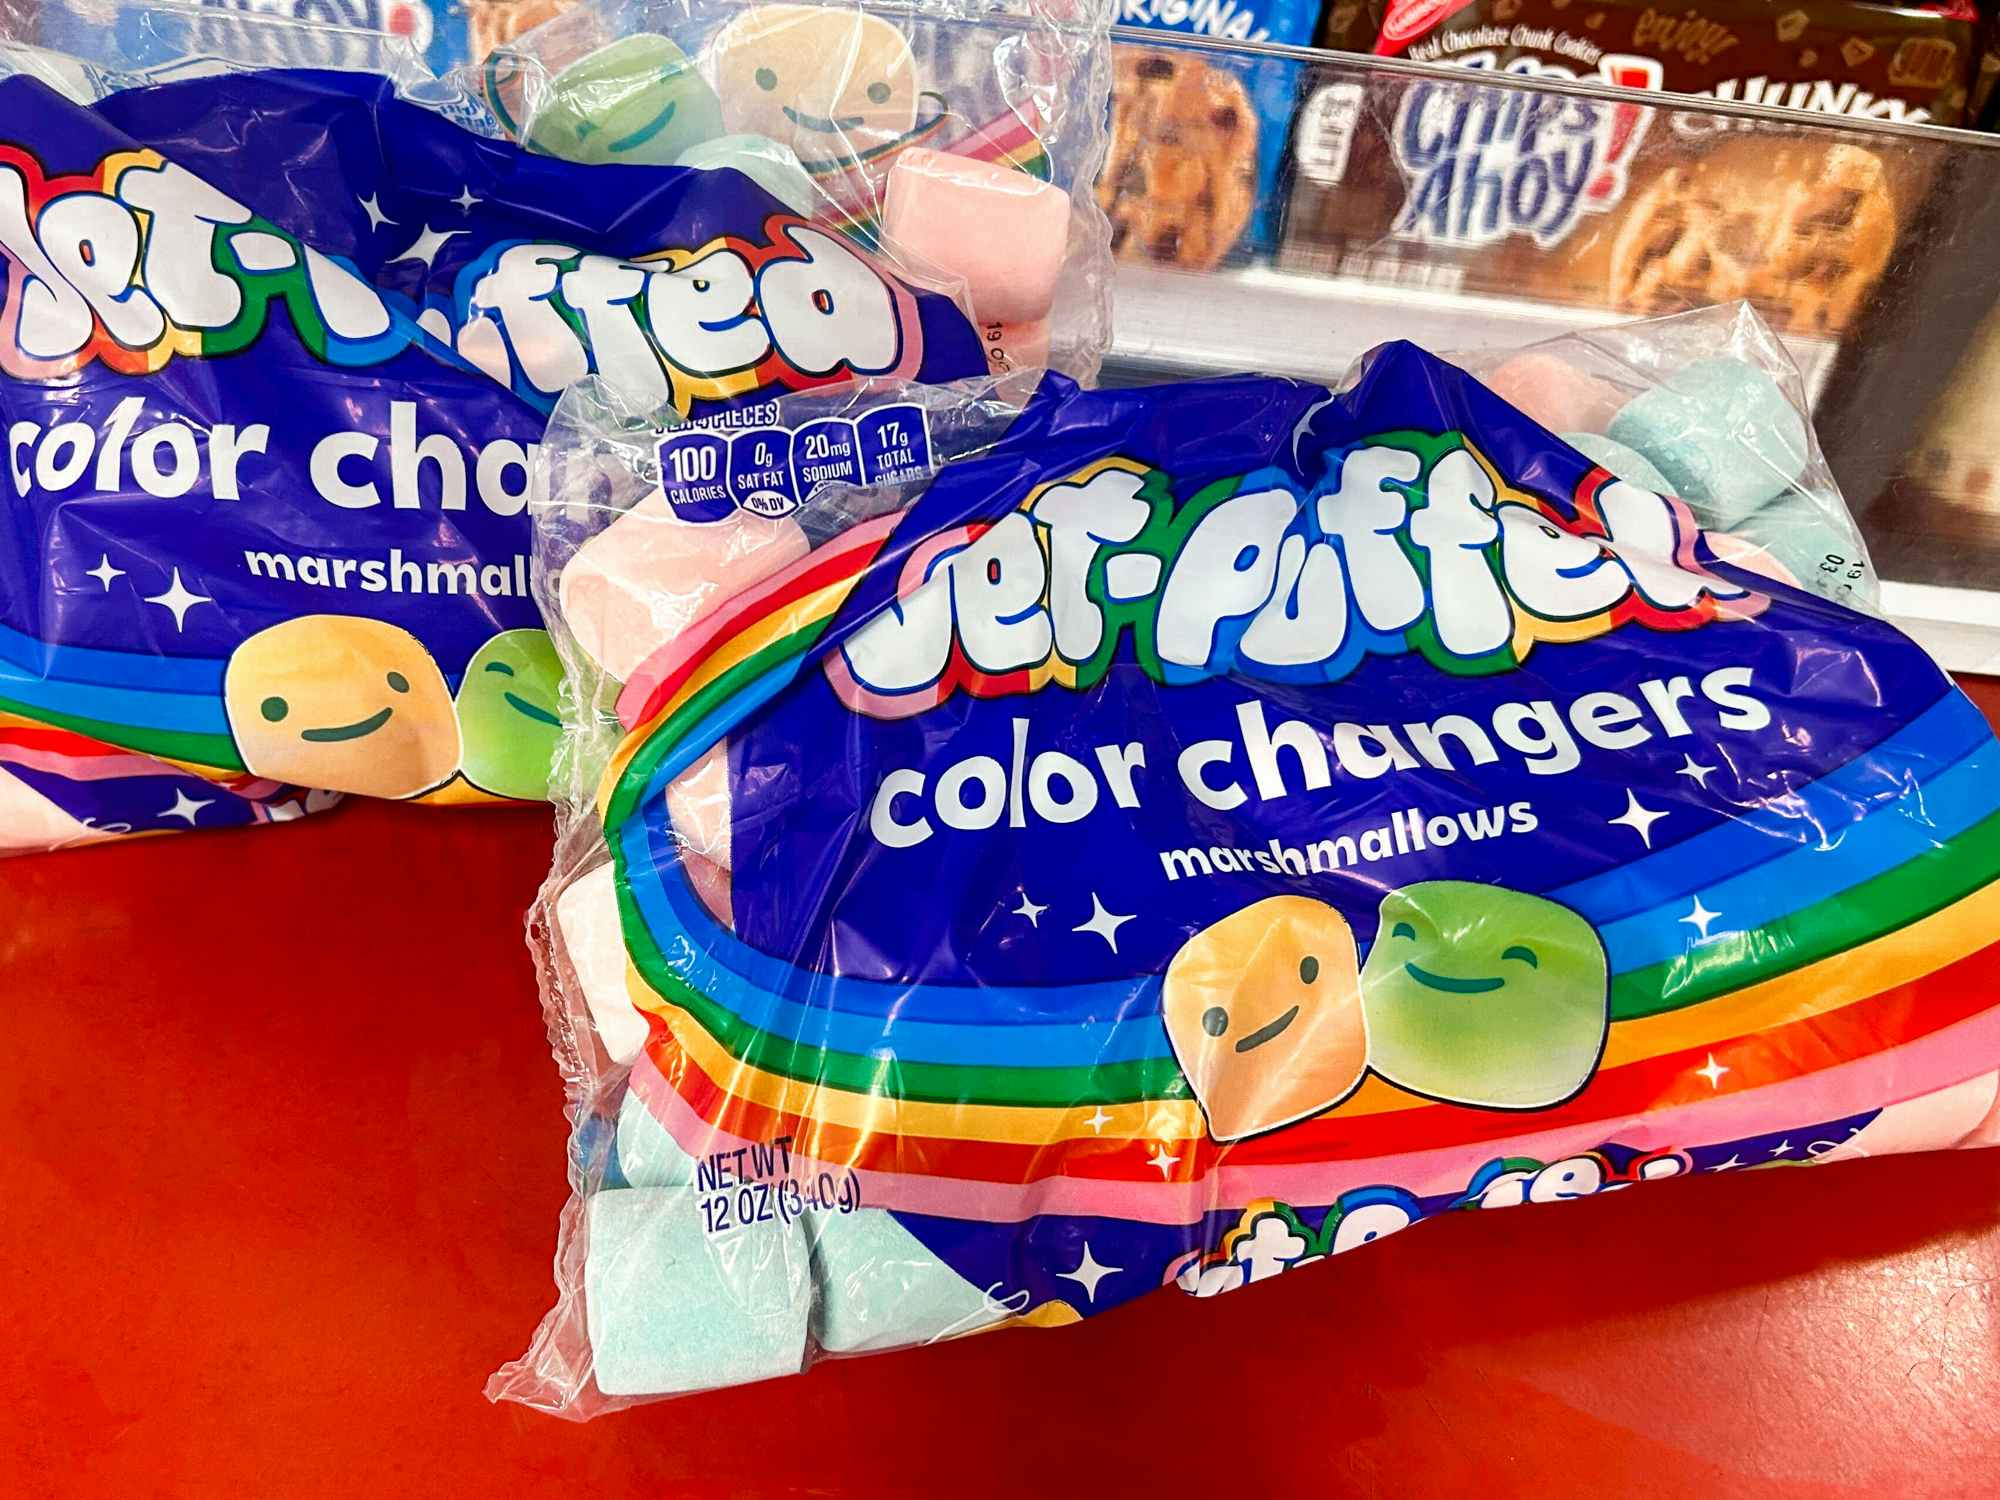 Bags of Jet Puffed Color Changers marshmallows in Target